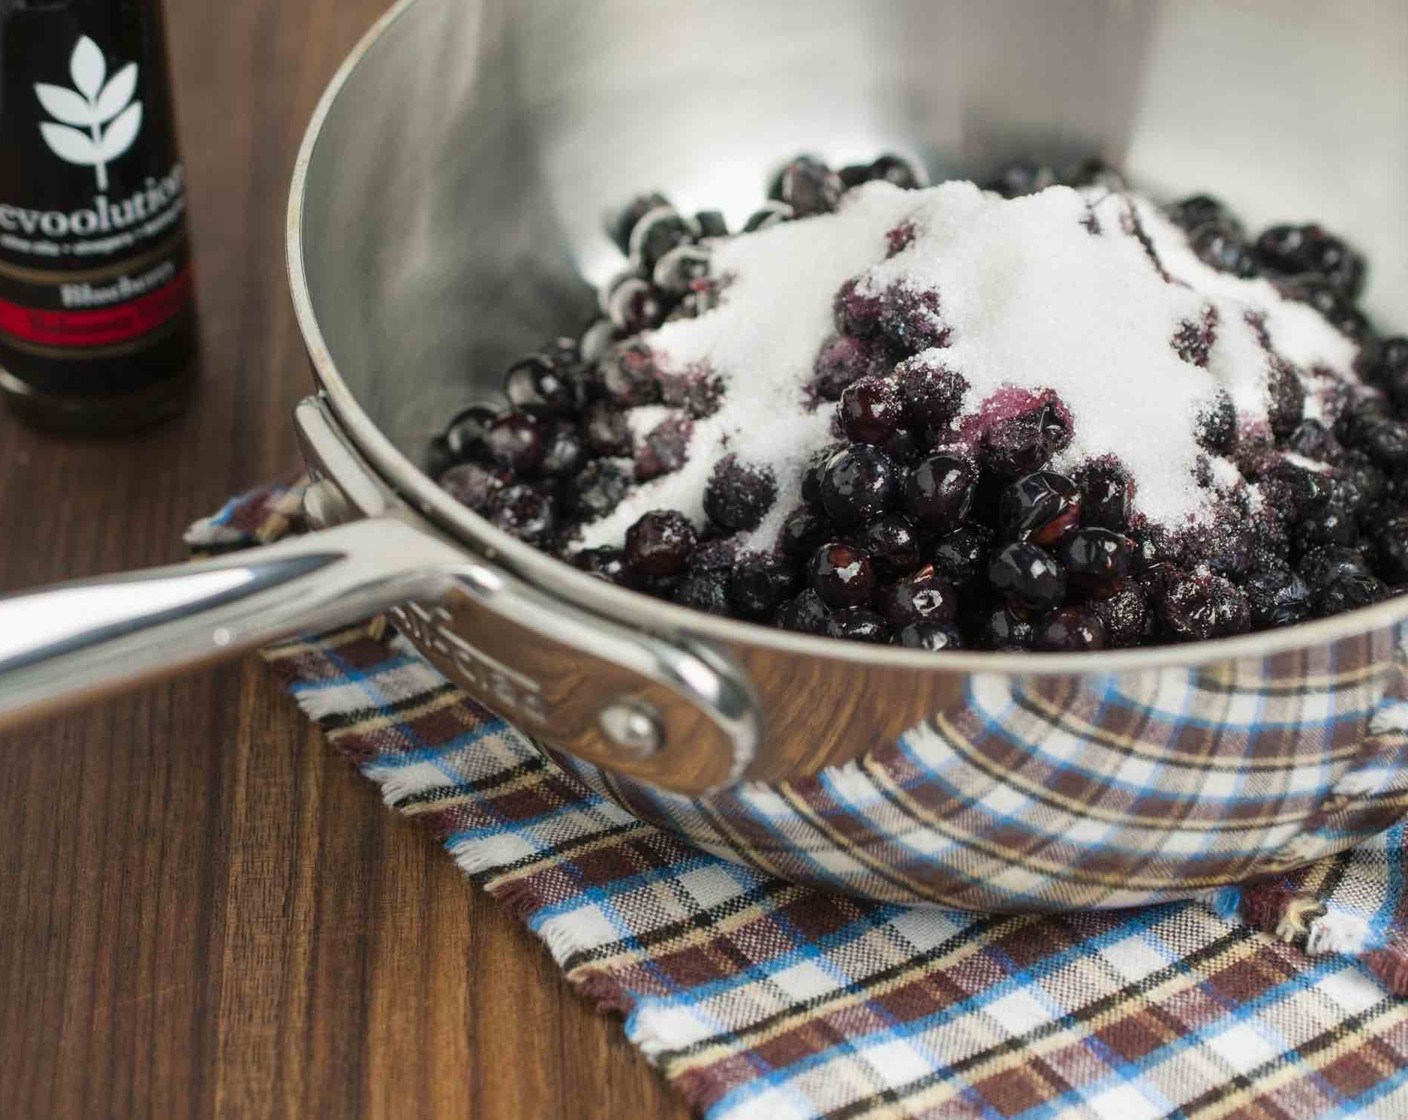 step 4 Meanwhile prepare the blueberry balsamic sauce. In a medium sauce pan combine Frozen Blueberries (2 cups), Granulated Sugar (1/2 cup), and Water (1/4 cup).